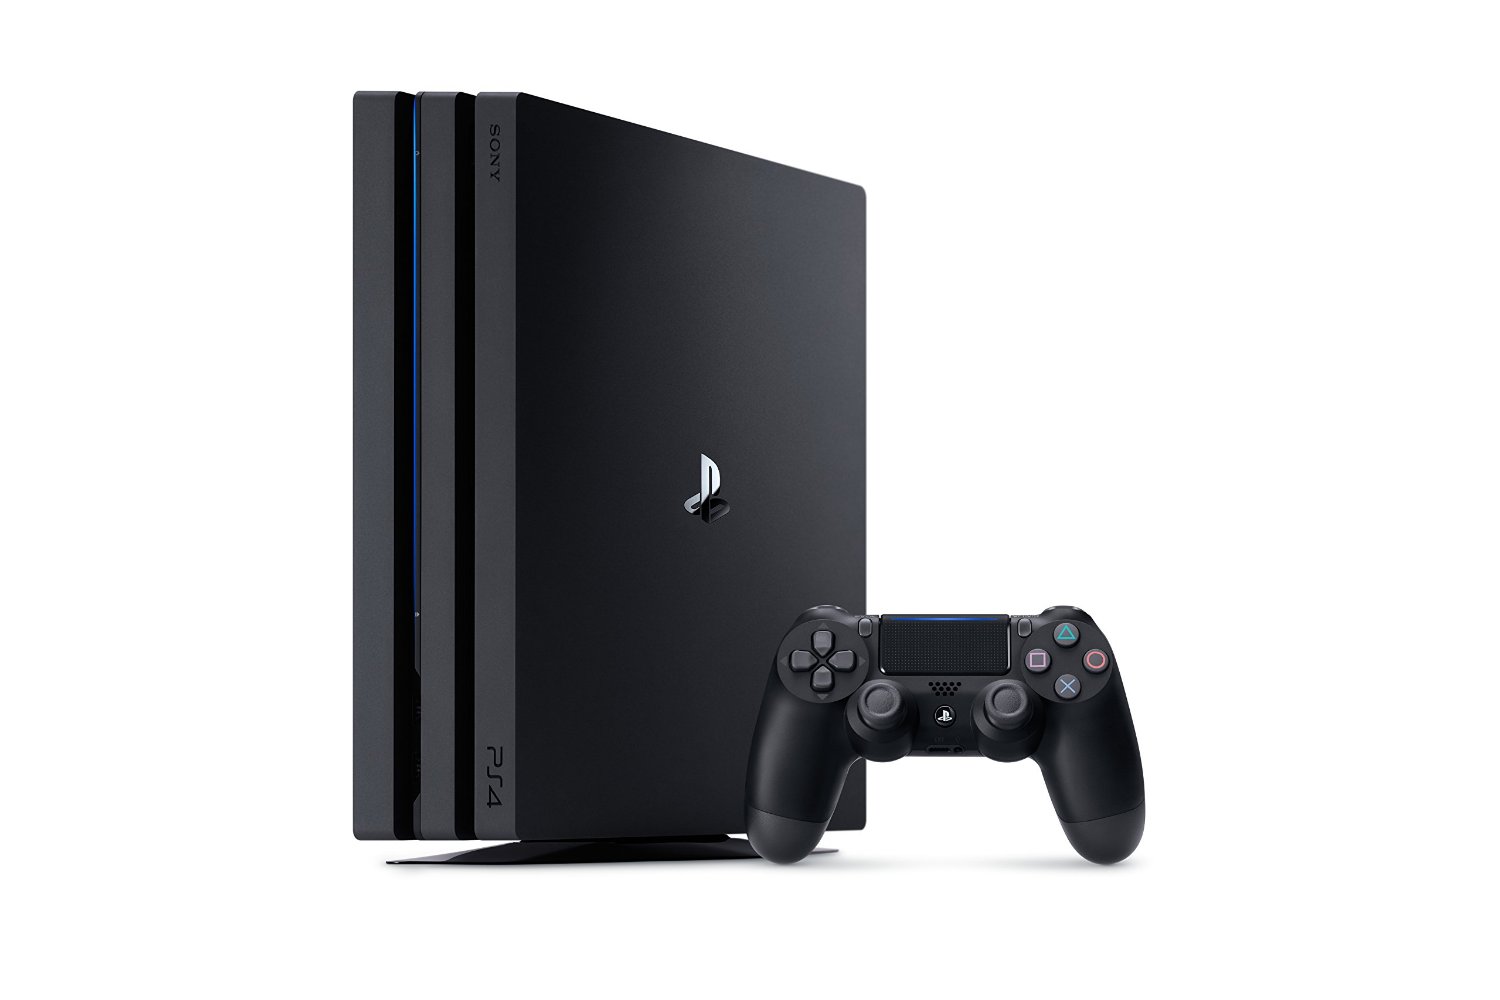 Sony reveals the PS4 Pro, its most powerful console ever